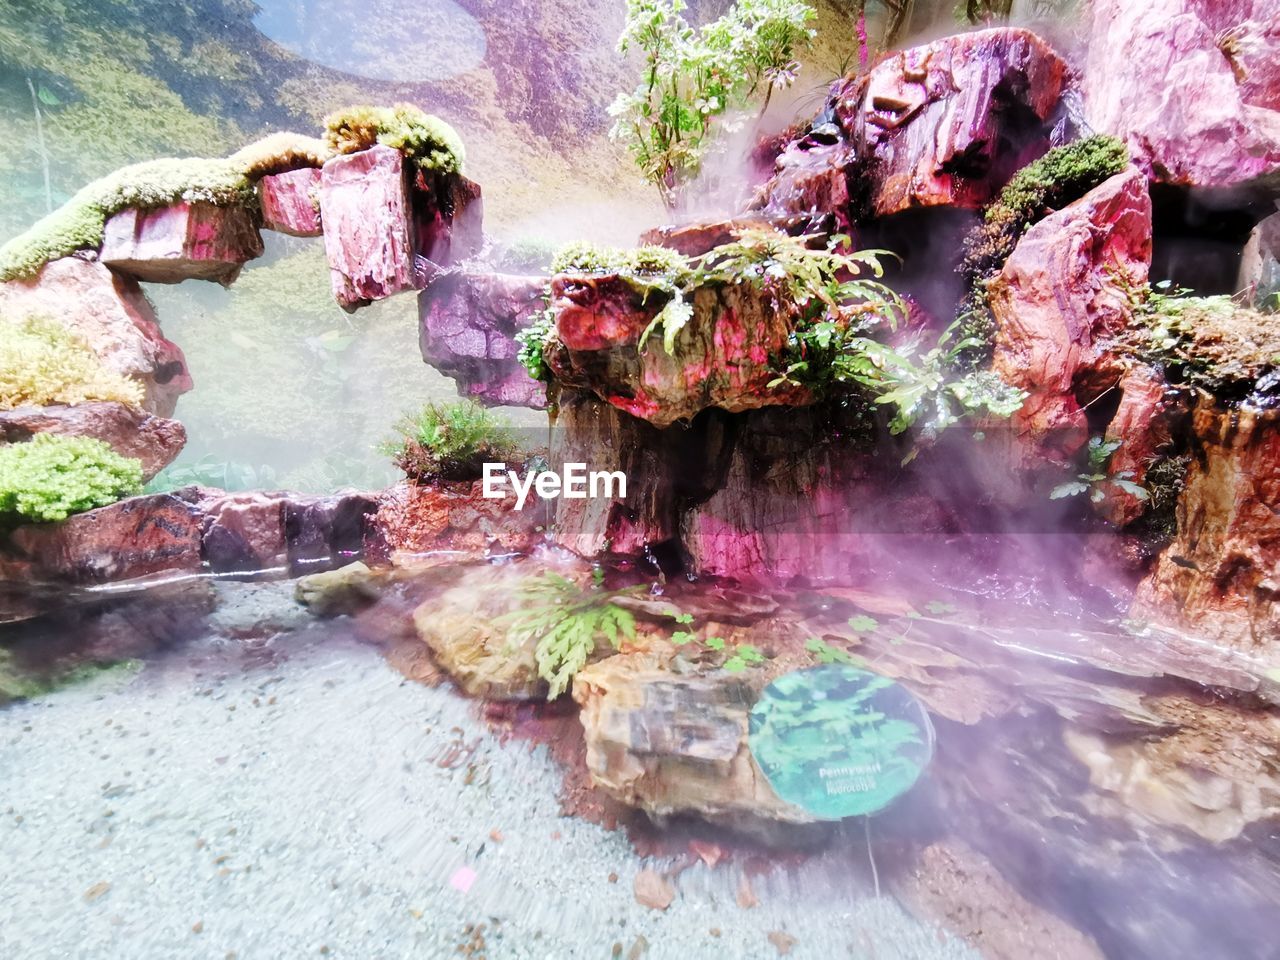 DIGITAL COMPOSITE IMAGE OF ROCKS AND WATER